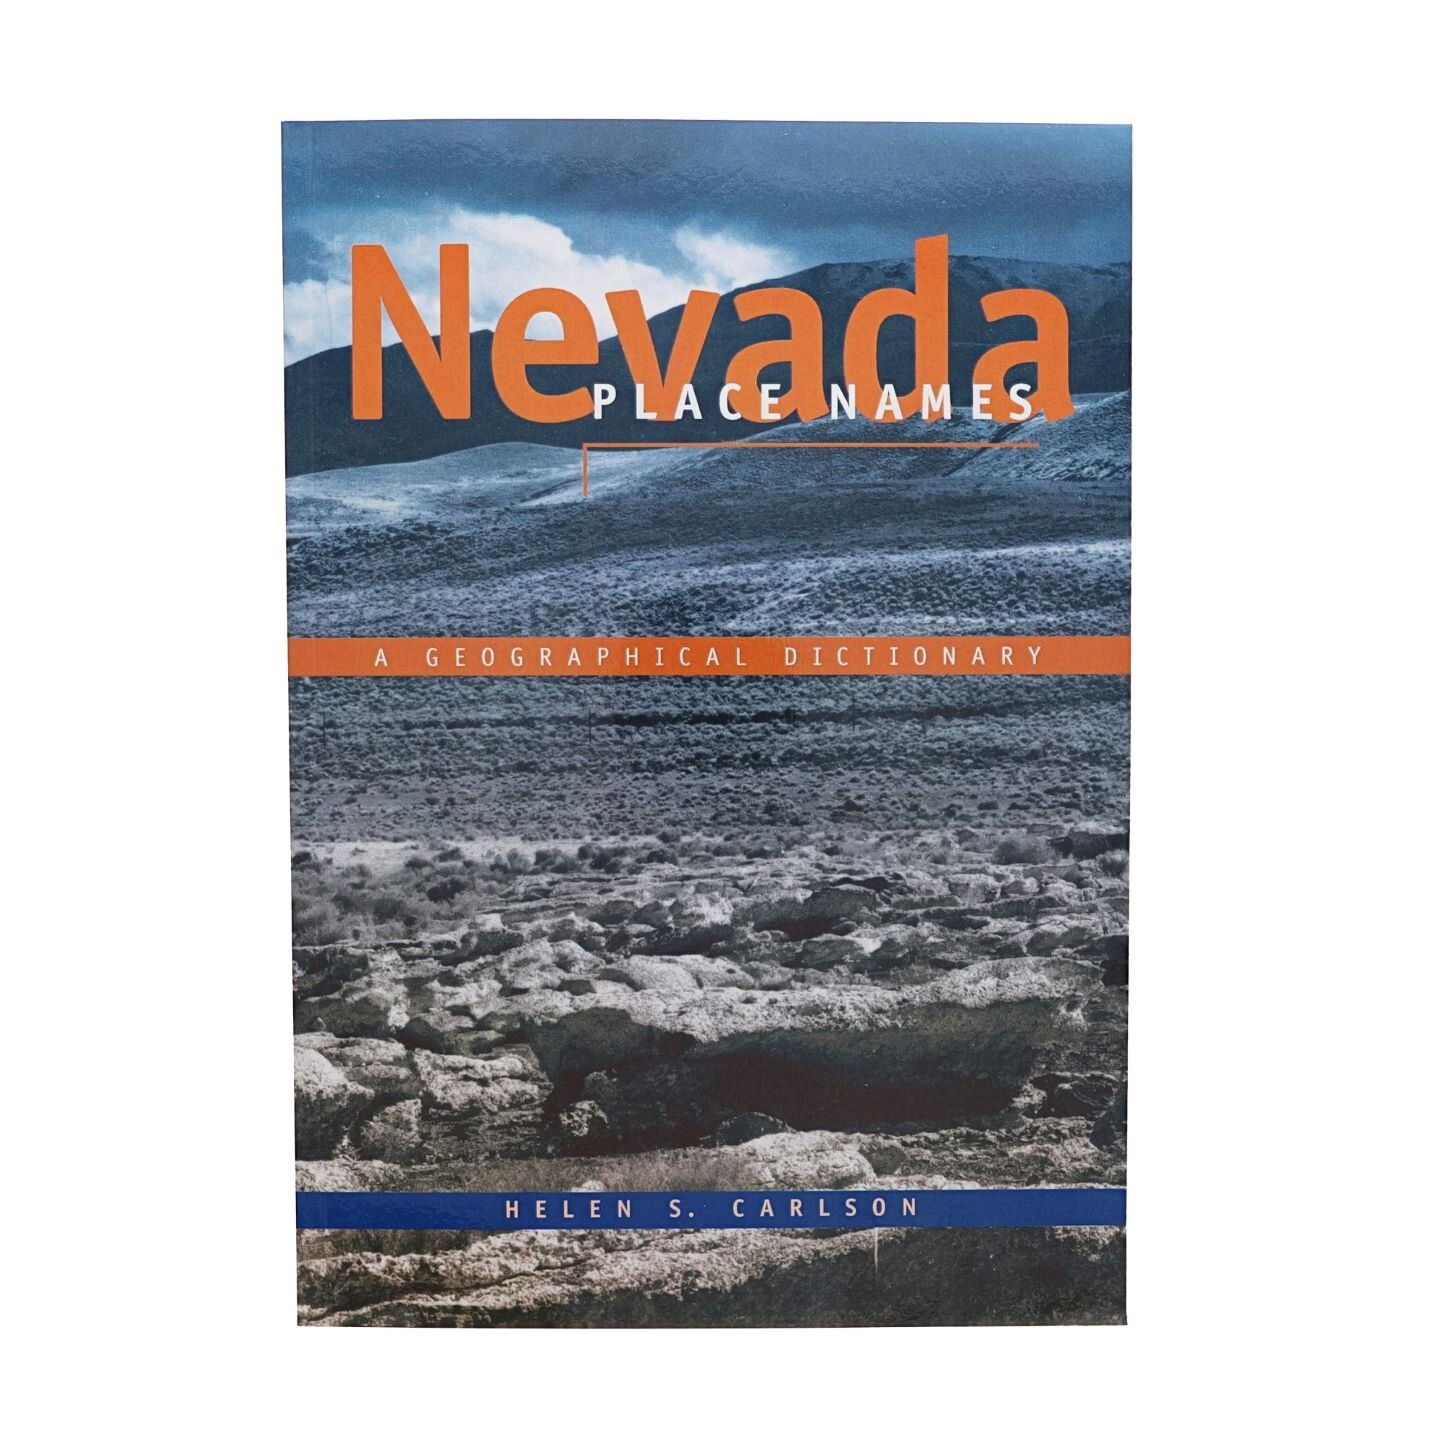 Nevada Place Names by Helen S. Carlson